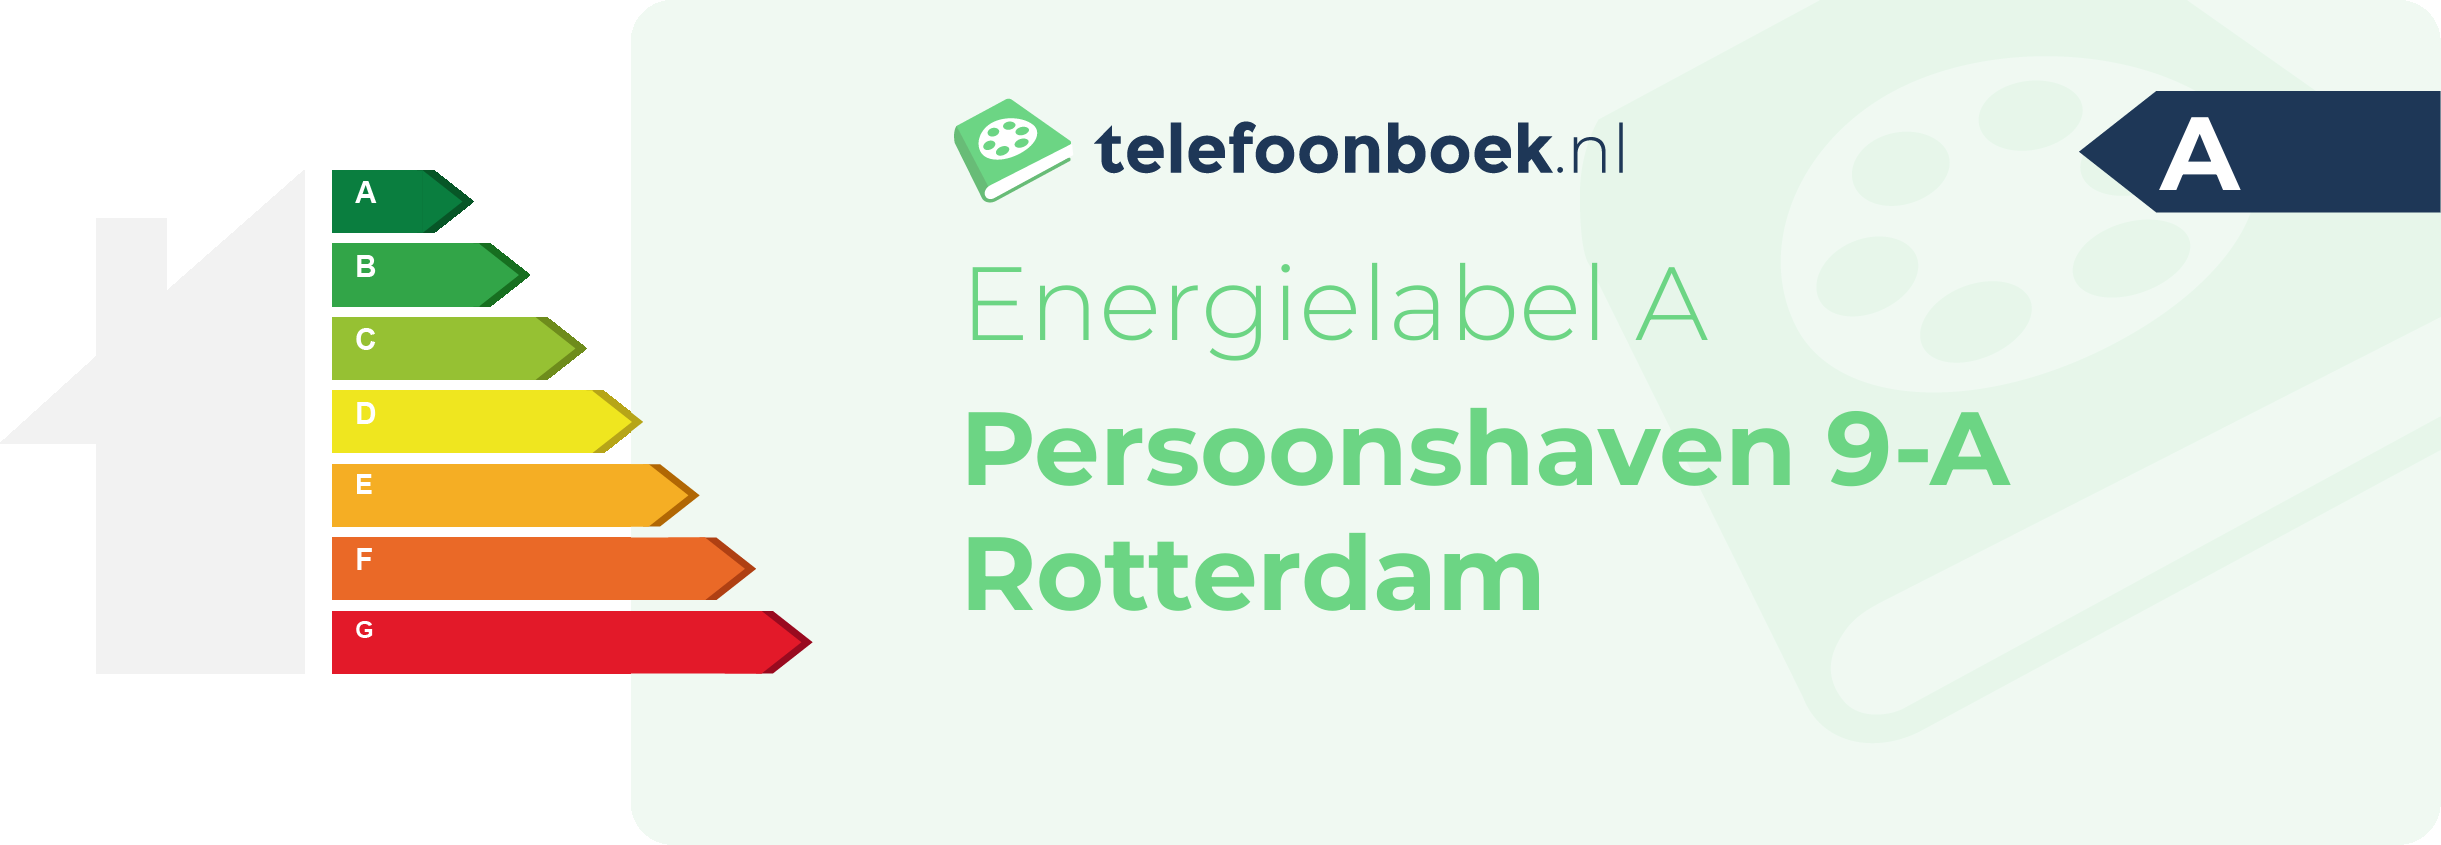 Energielabel Persoonshaven 9-A Rotterdam